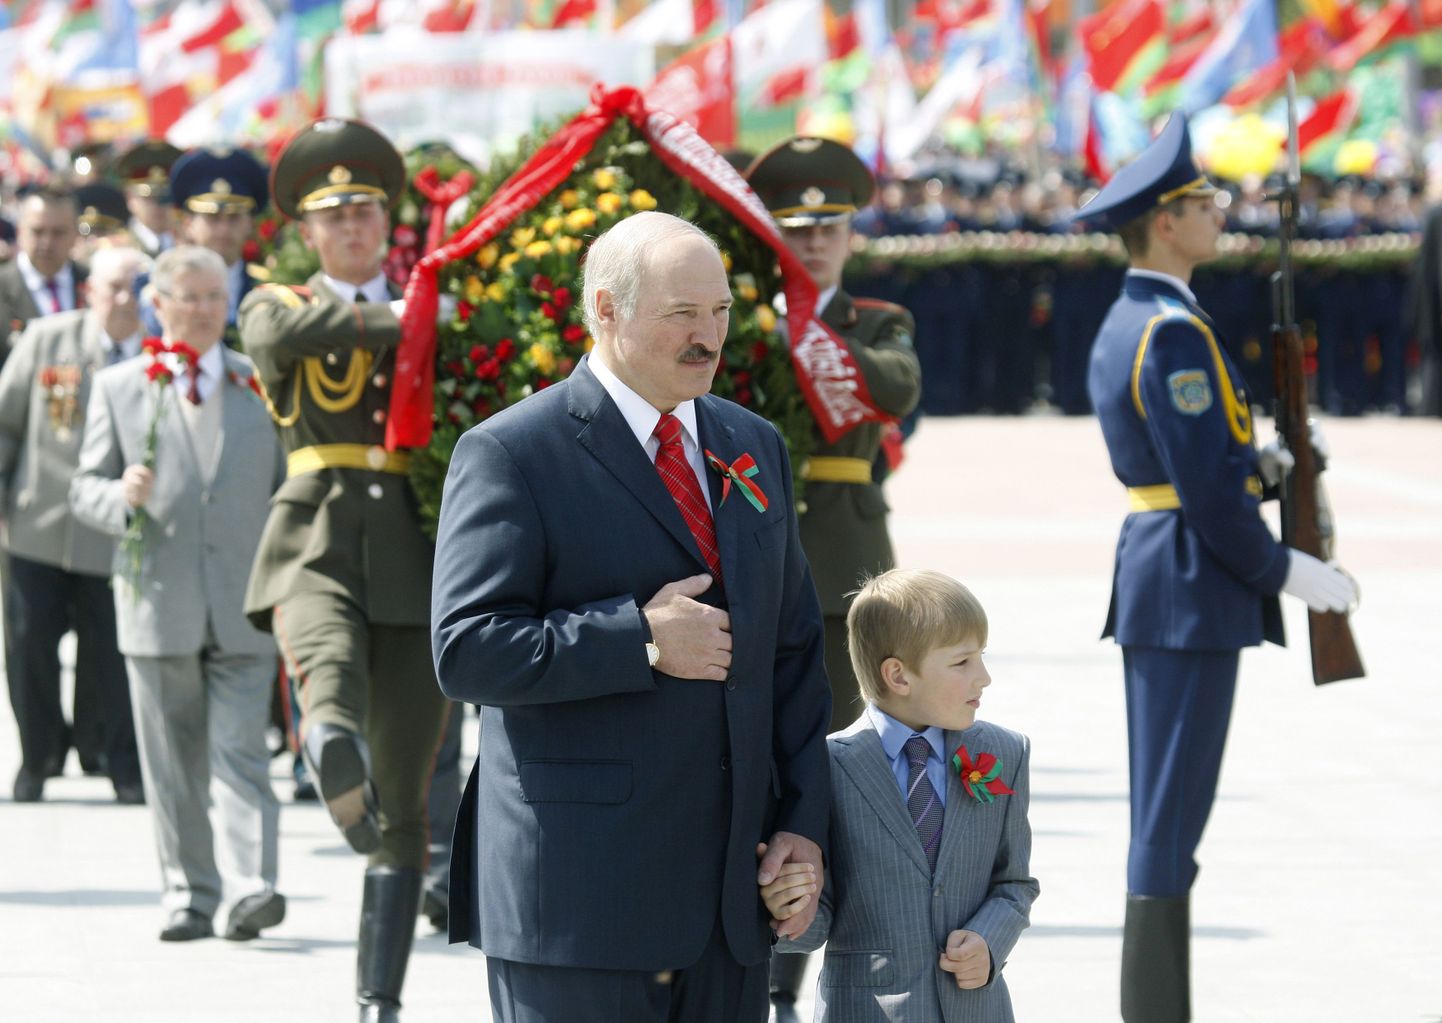 Belarus' President Alexander Lukashenko with his son Nikolay take part in a wreath laying ceremony at Victory square in Minsk May 9, 2011. Belarus celebrated the 66th anniversary of the World War Two victory over Nazi Germany on Monday.  REUTERS/Vasily Fedosenko (BELARUS - Tags: ANNIVERSARY CIVIL UNREST POLITICS)